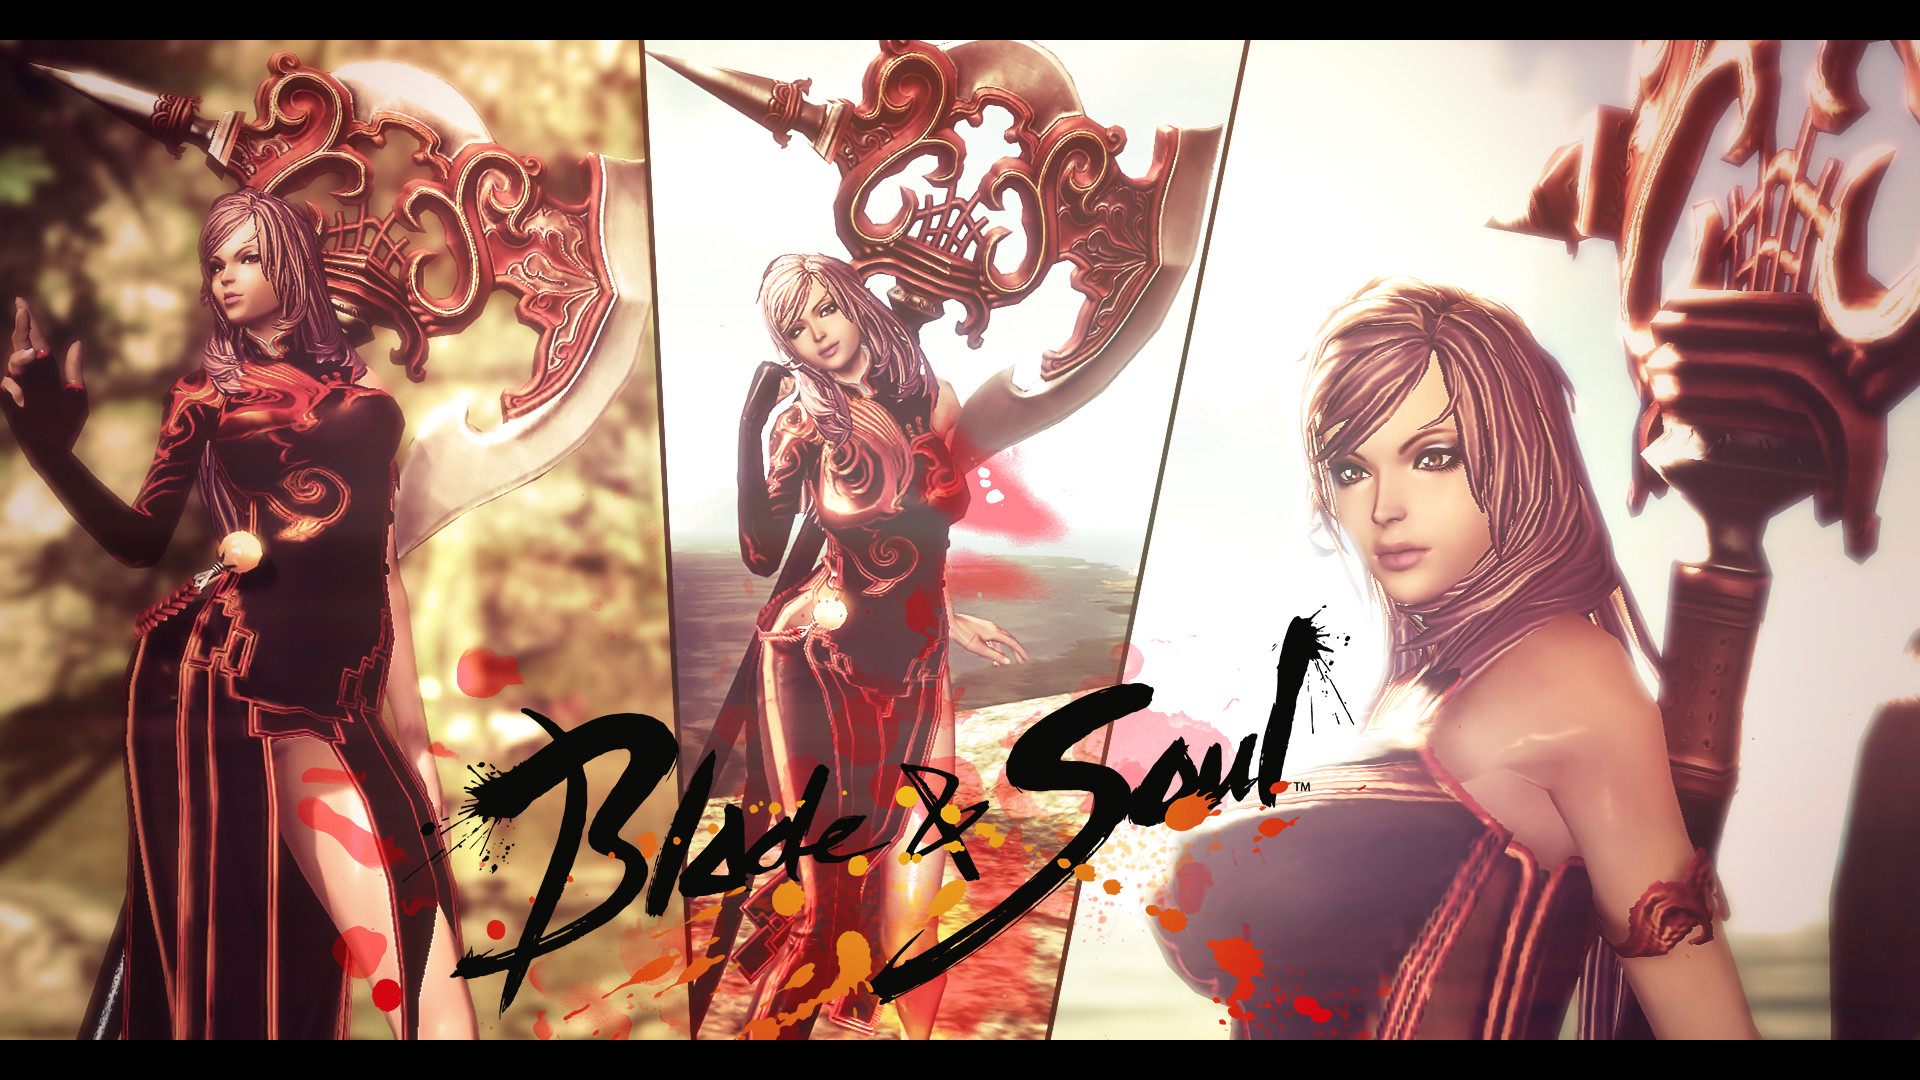 1920x1080 ... Blade and Soul wallpaper - my character by kampinis